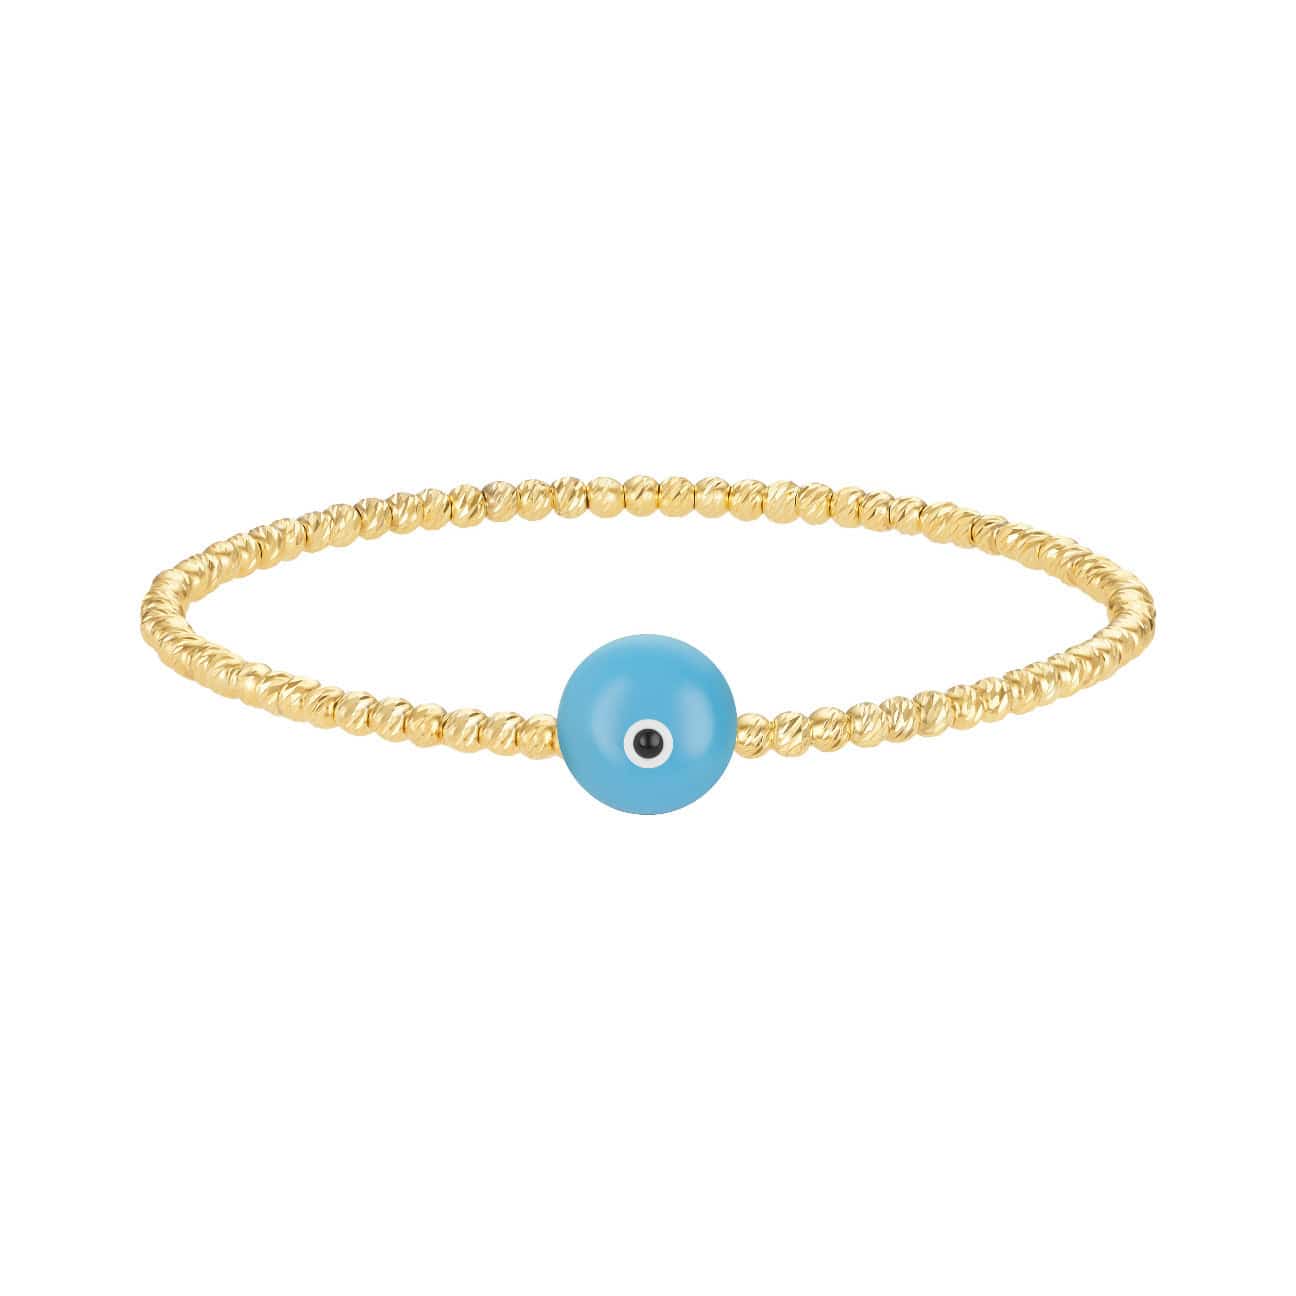 Bead Bracelet with Majestic Evil Eye - Yellow Gold and Turquoise - Golden Tangerine